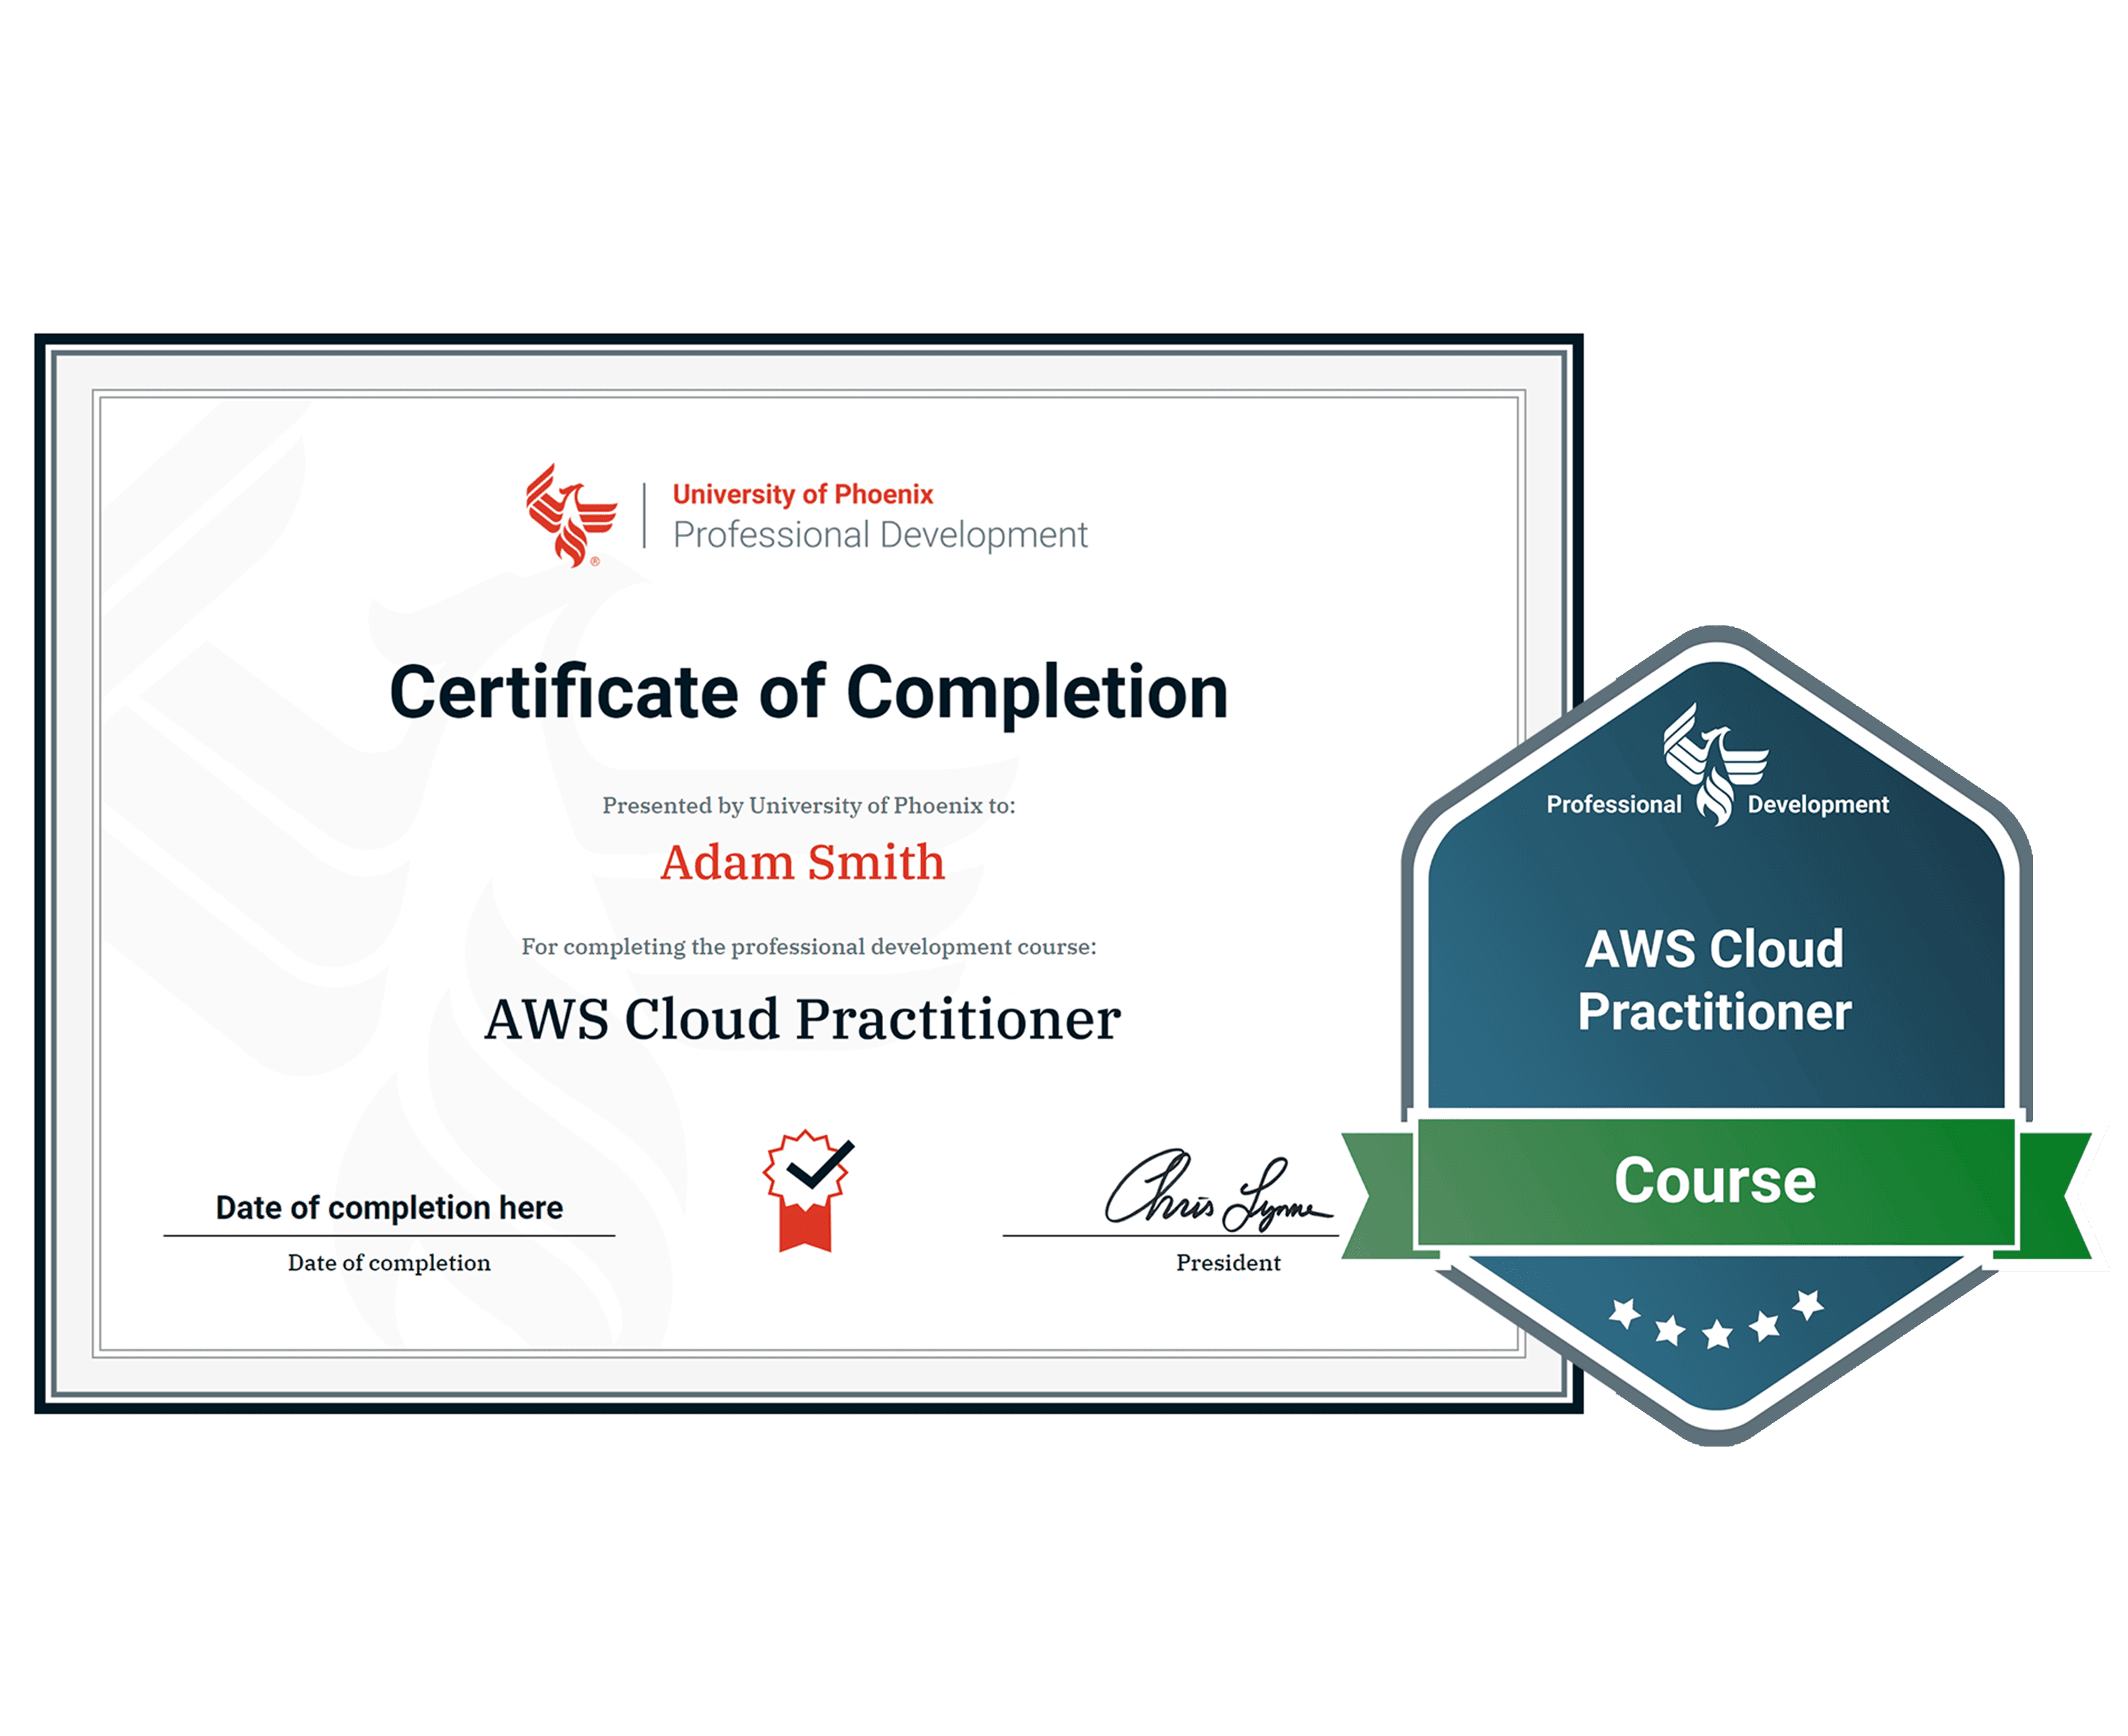 Sample certificate and badge for AWS Cloud Practitioner course